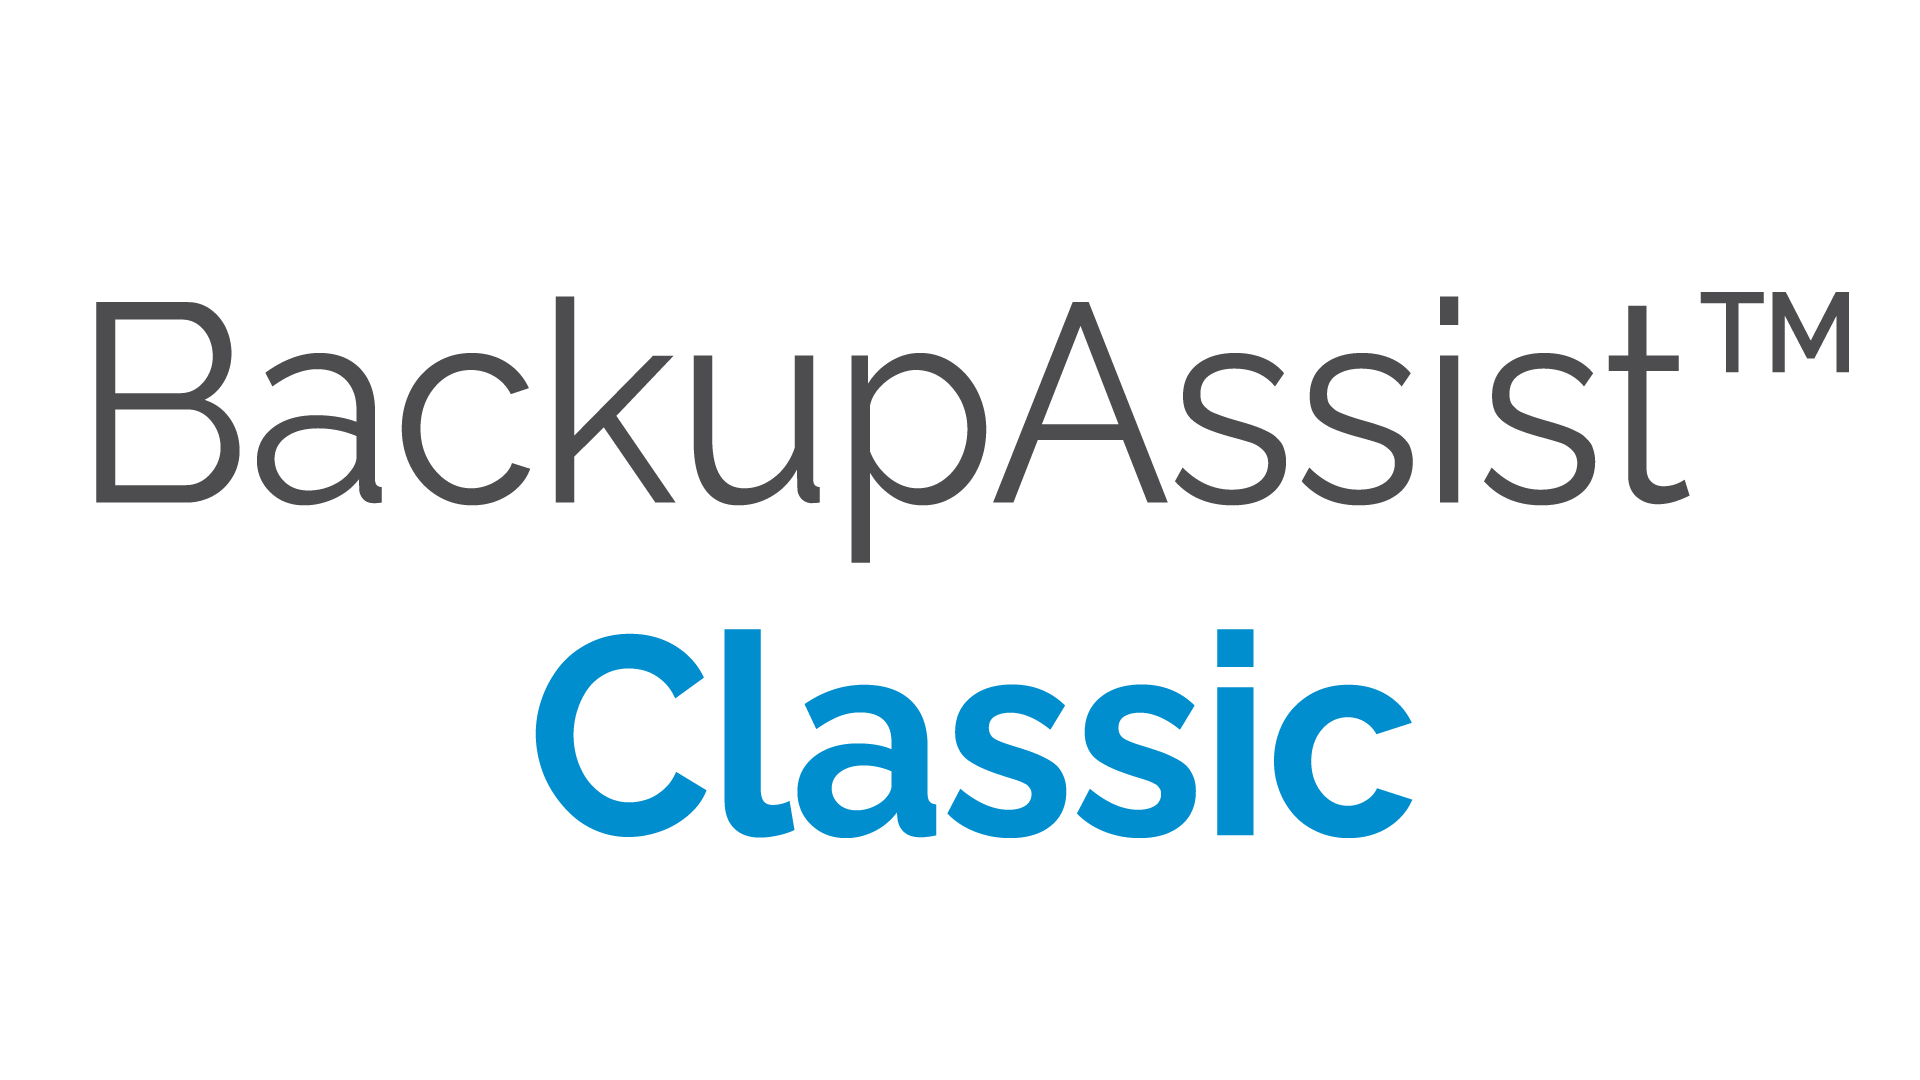 BackupAssist Classic 12.0.5 instal the new version for windows